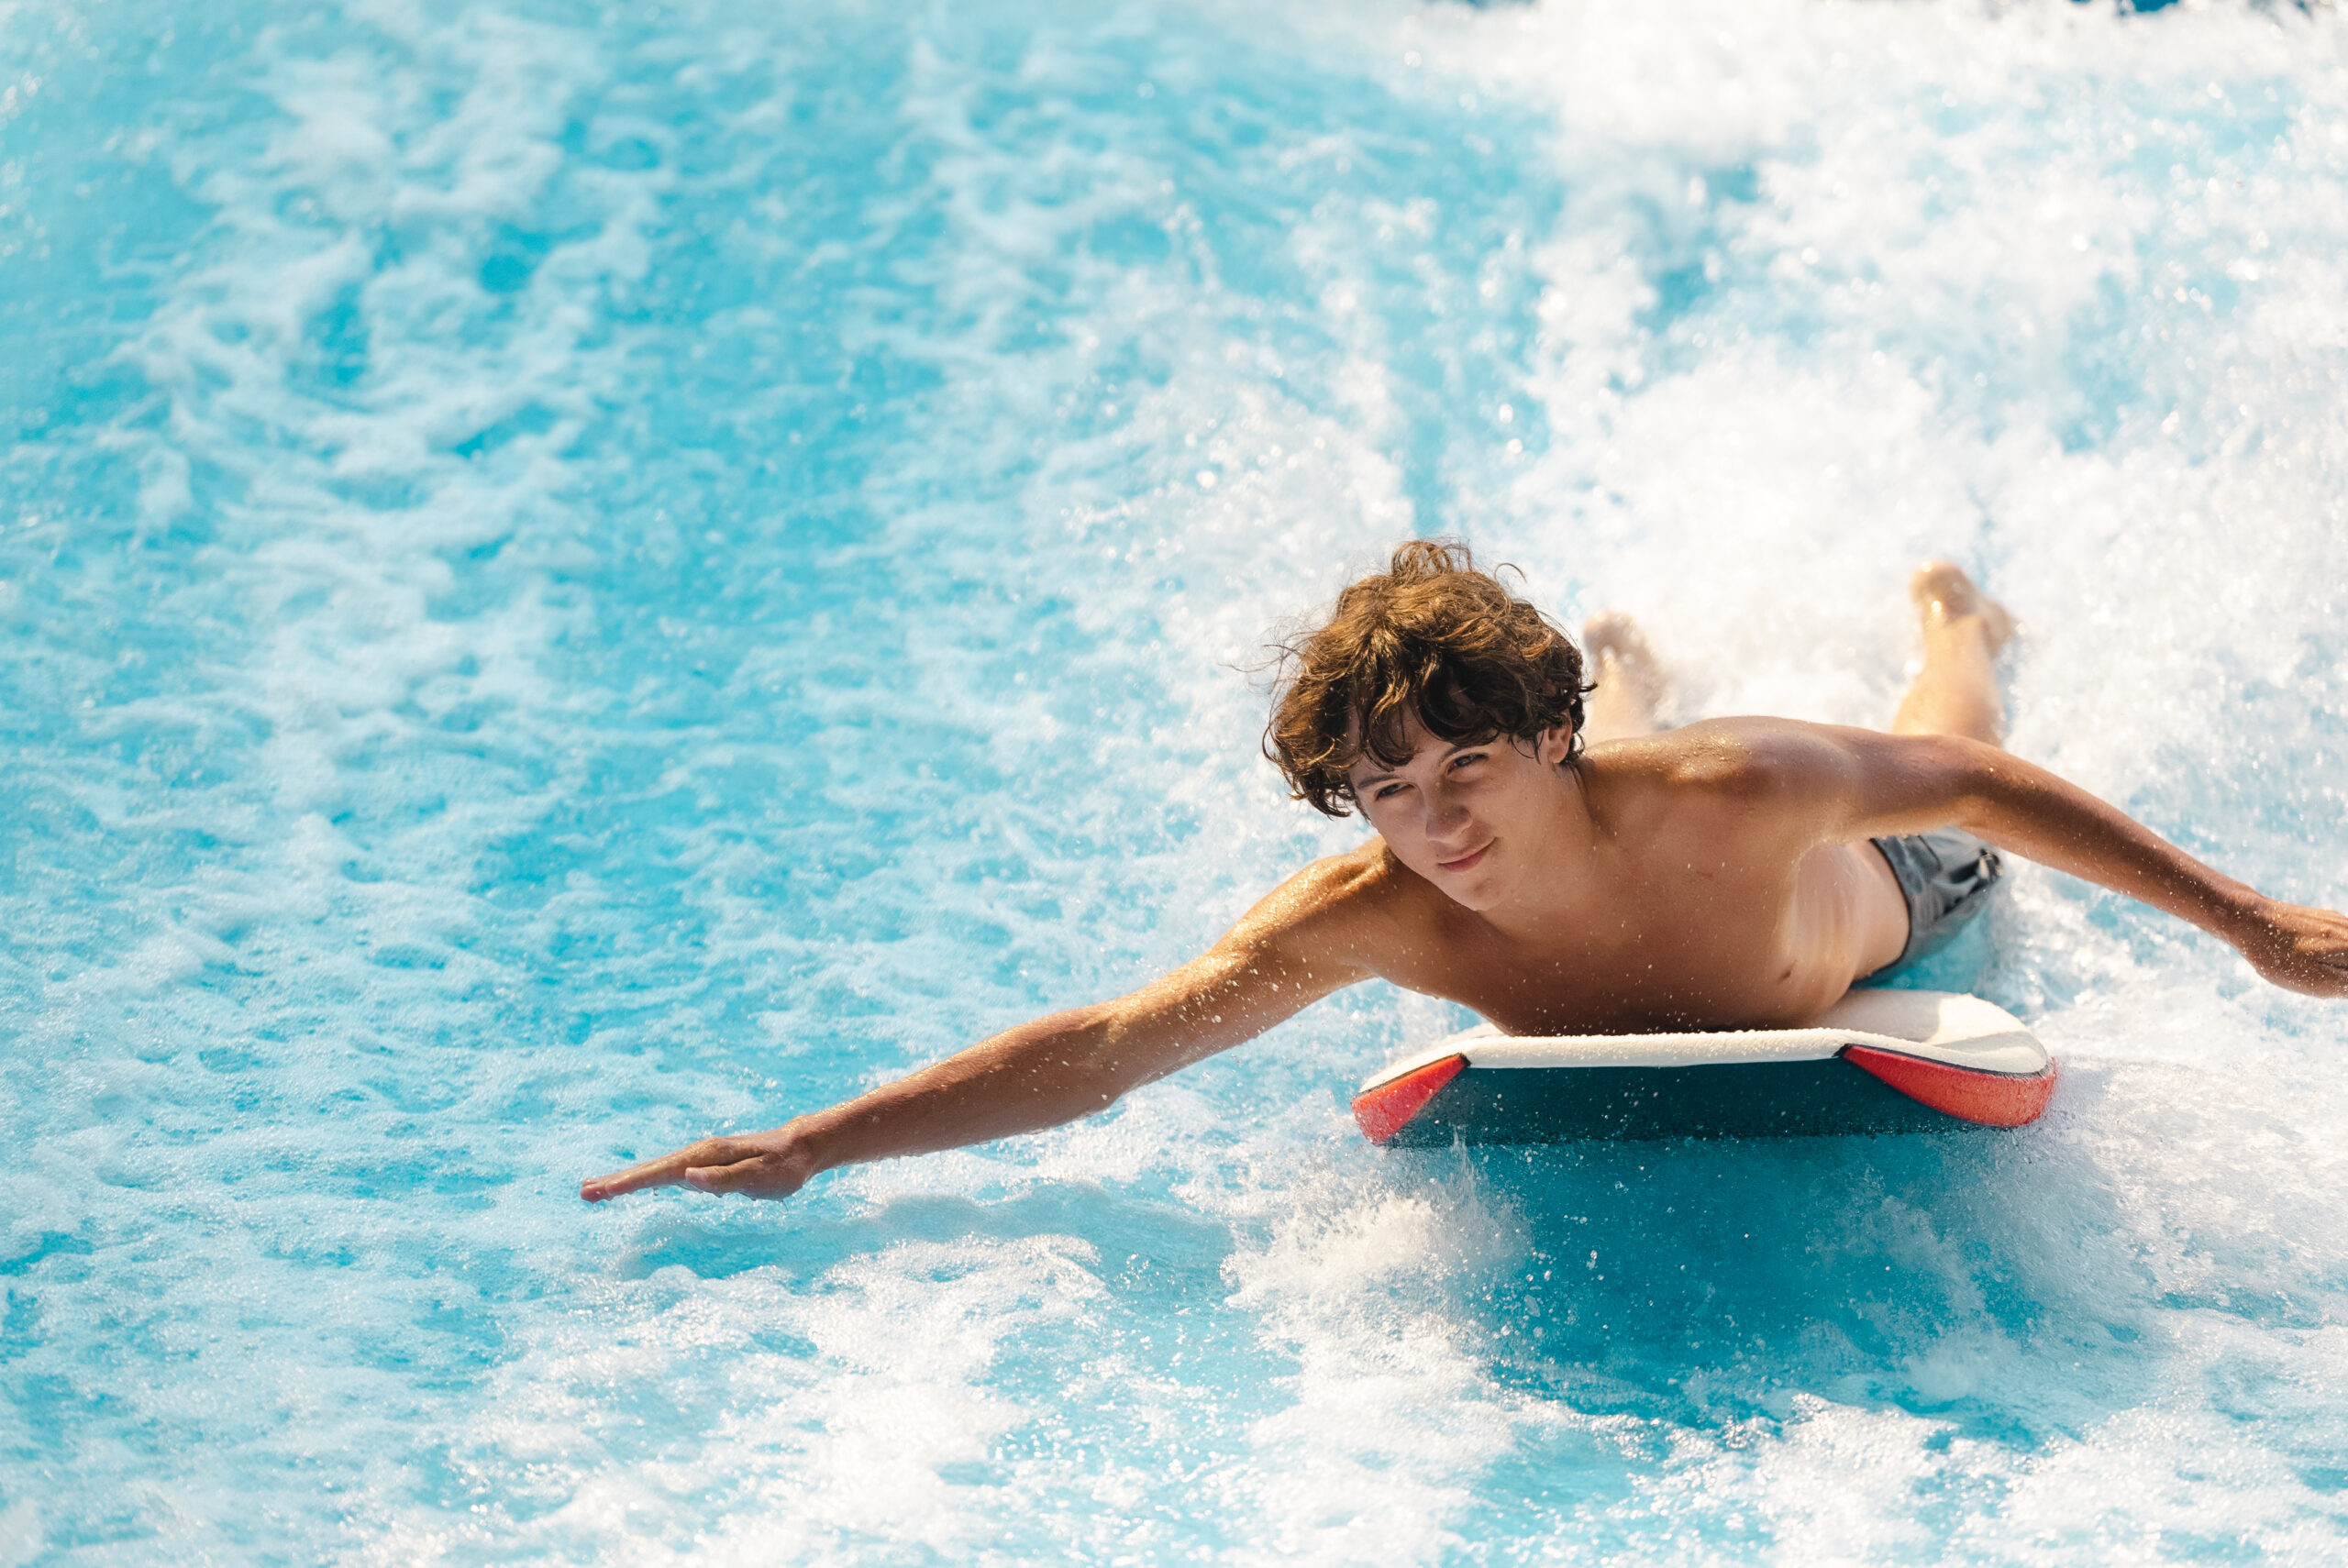 Young man with curly hair on Flowrider